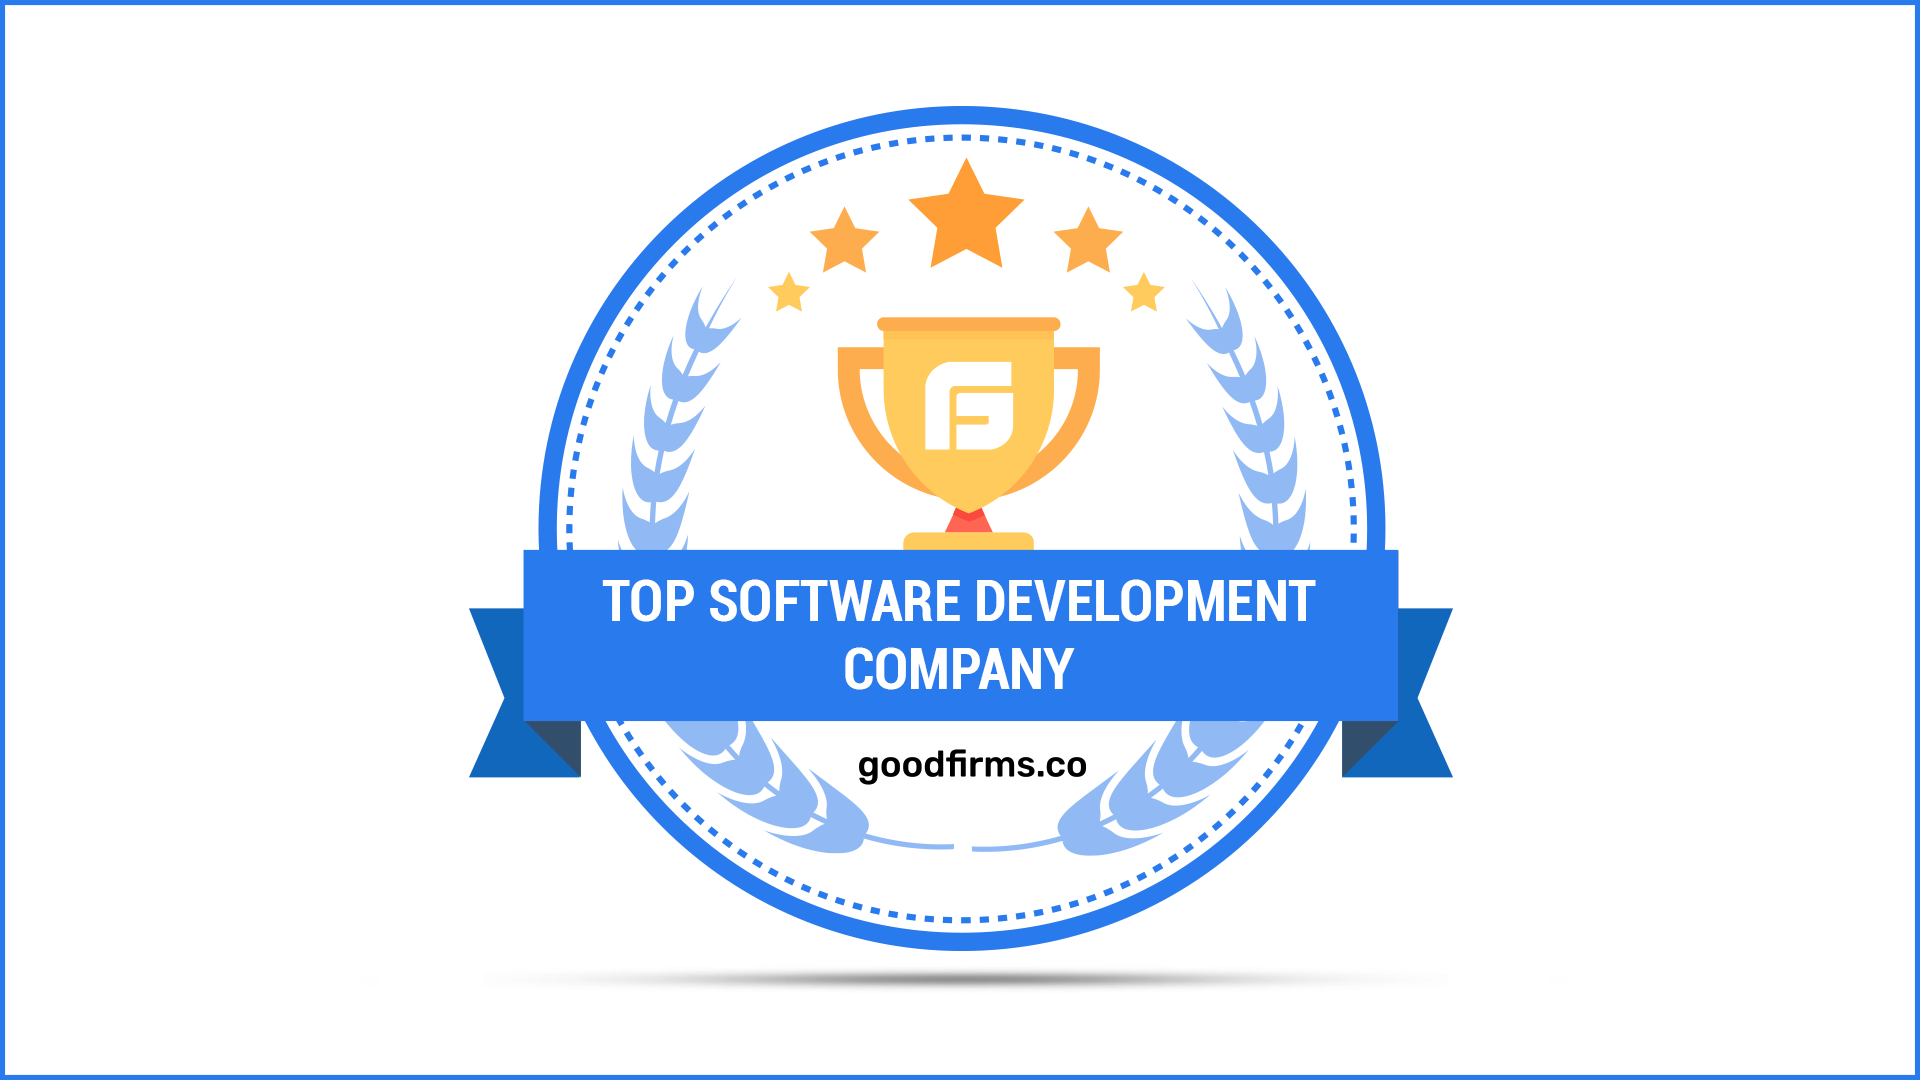 Code District Is All Set to Lead at GoodFirms by Rendering High-Quality Software Solutions